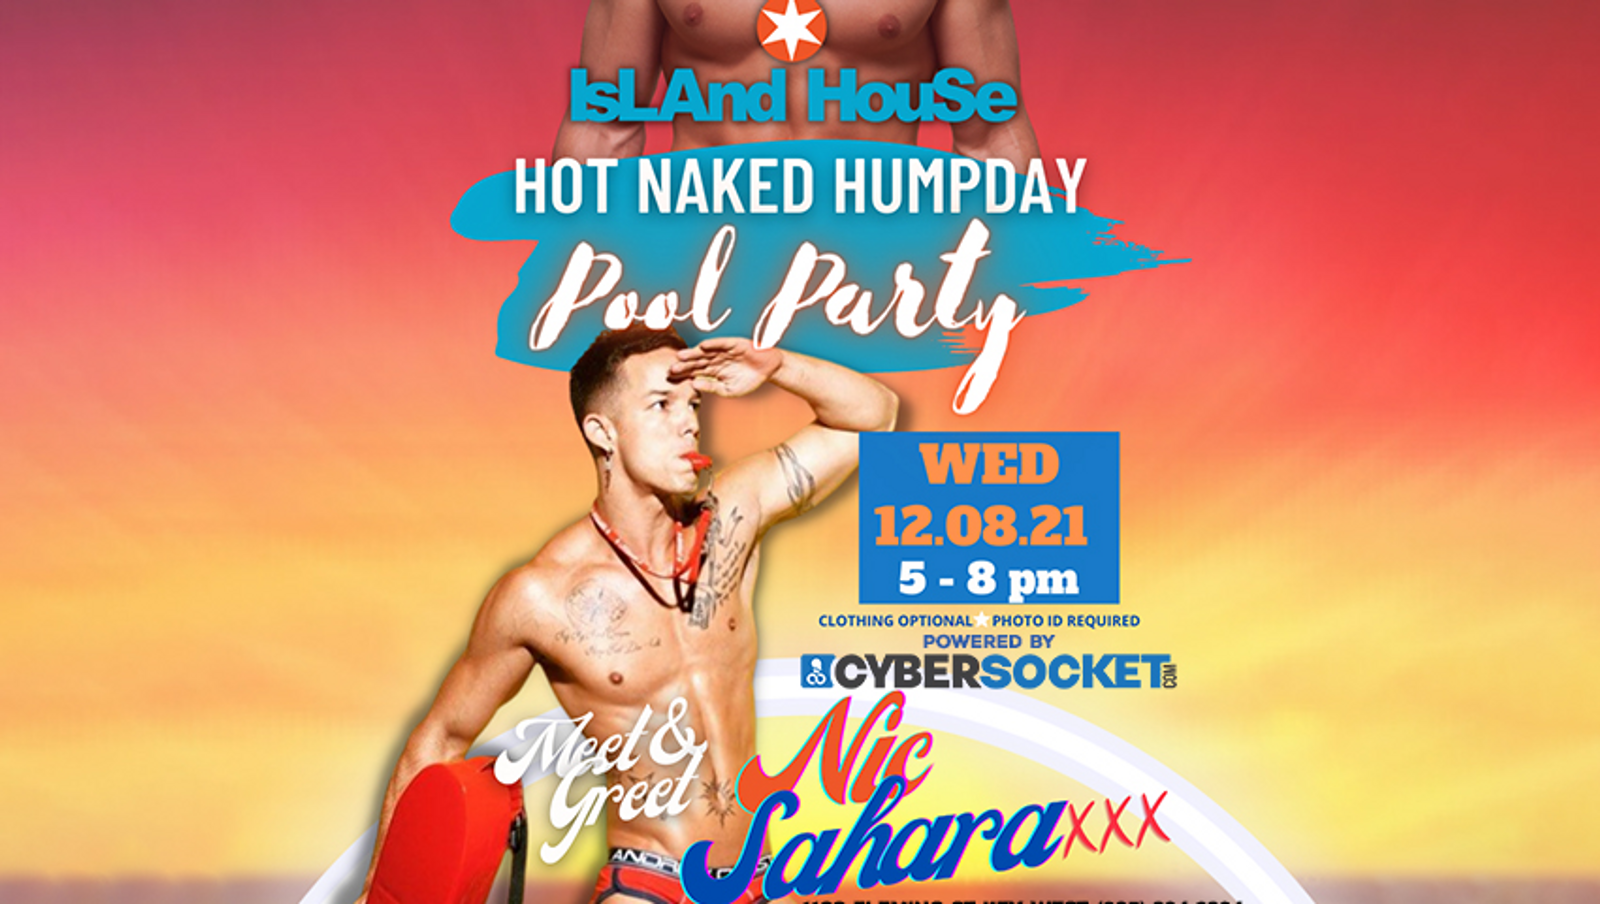 Cybersocket Sets Sights on Key West Pool Party With Nic Sahara